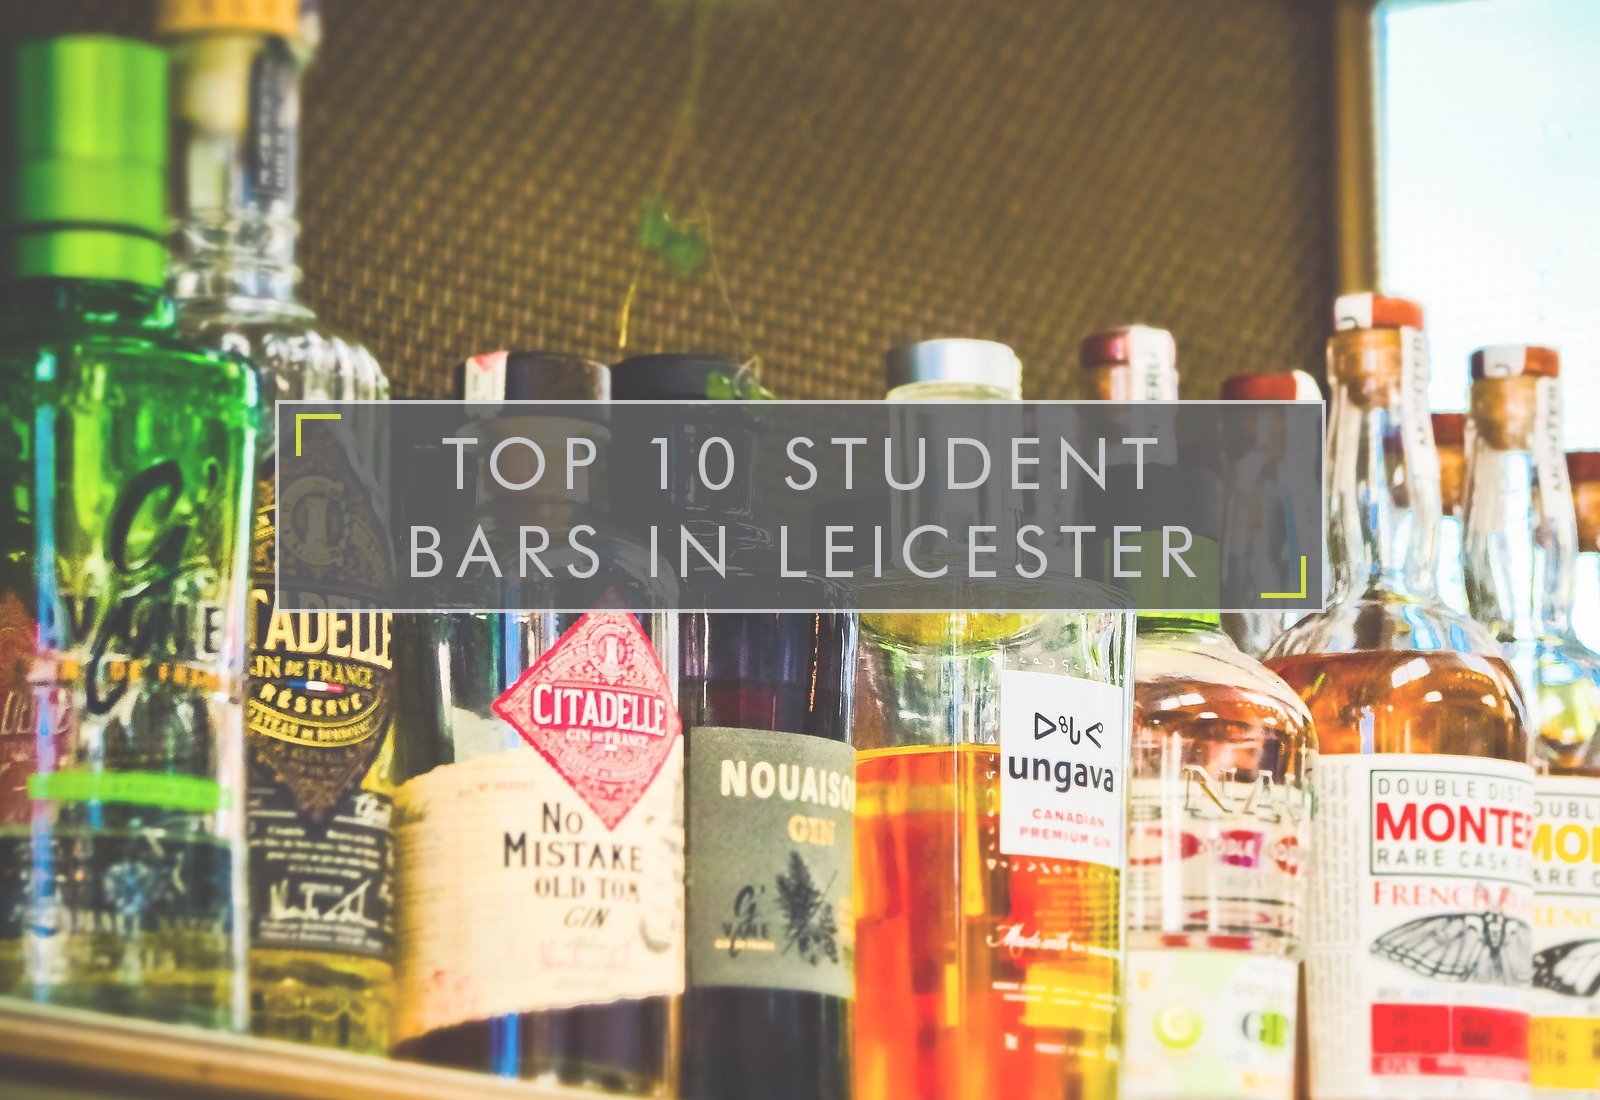 THE TOP 10 STUDENT BARS IN LEICESTER